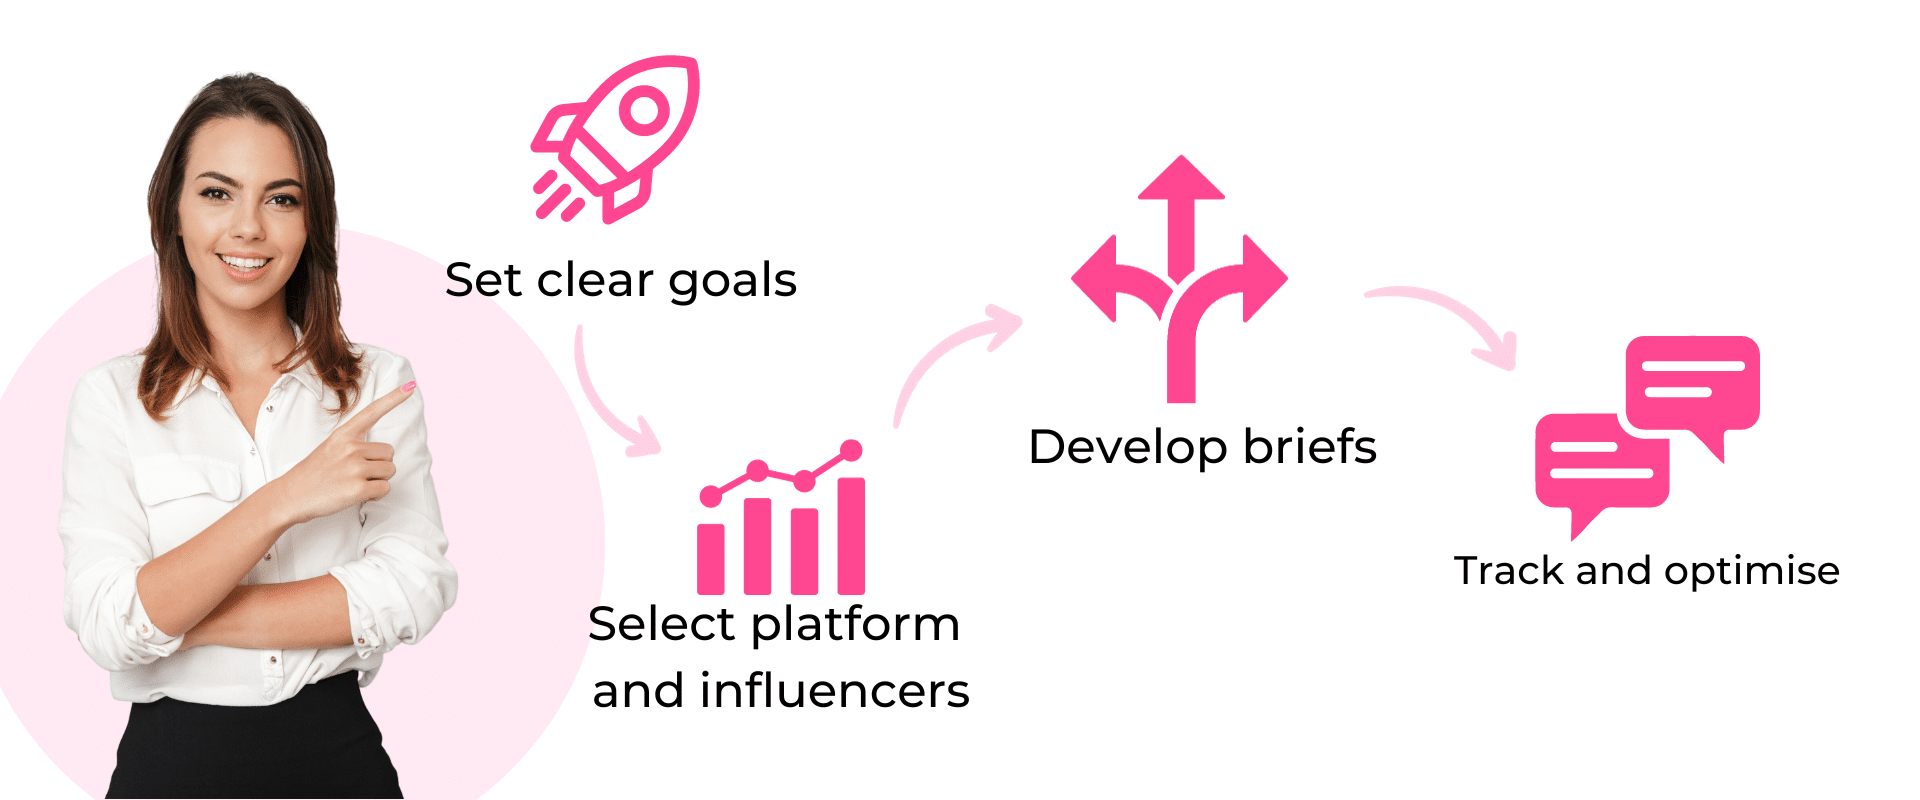 An image of a woman pointing to a set of goals.